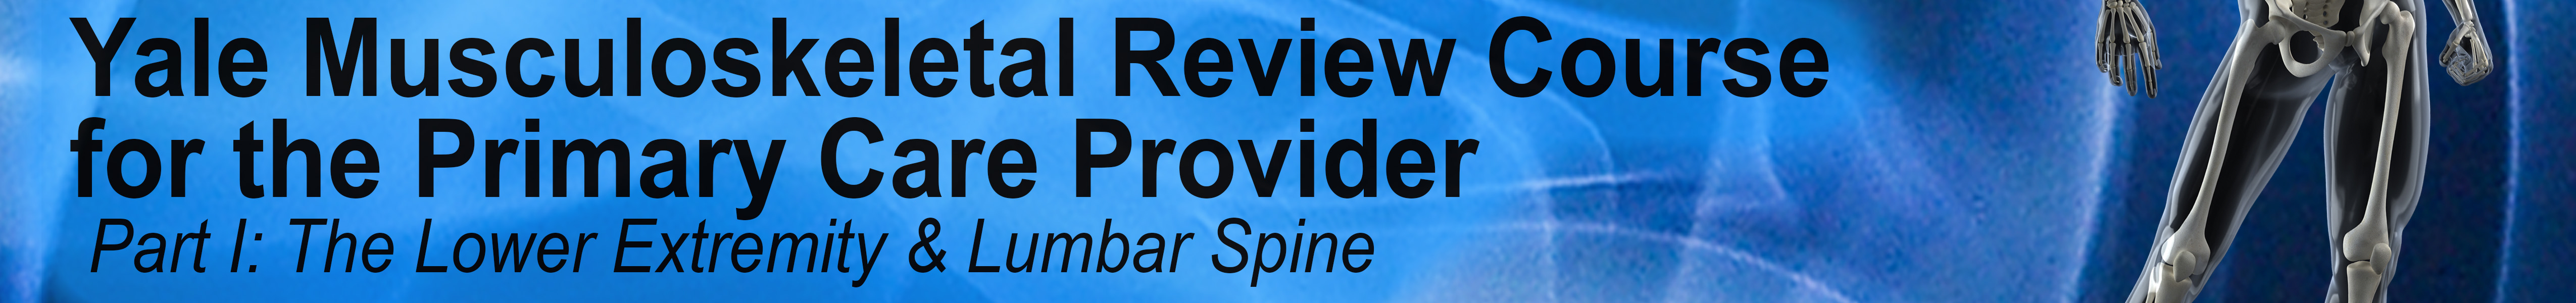 LIVE WEBINAR: Musculoskeletal Review Course for the Primary Care Provider,  Part I: The Lower Extremity & Lumbar Spine Banner